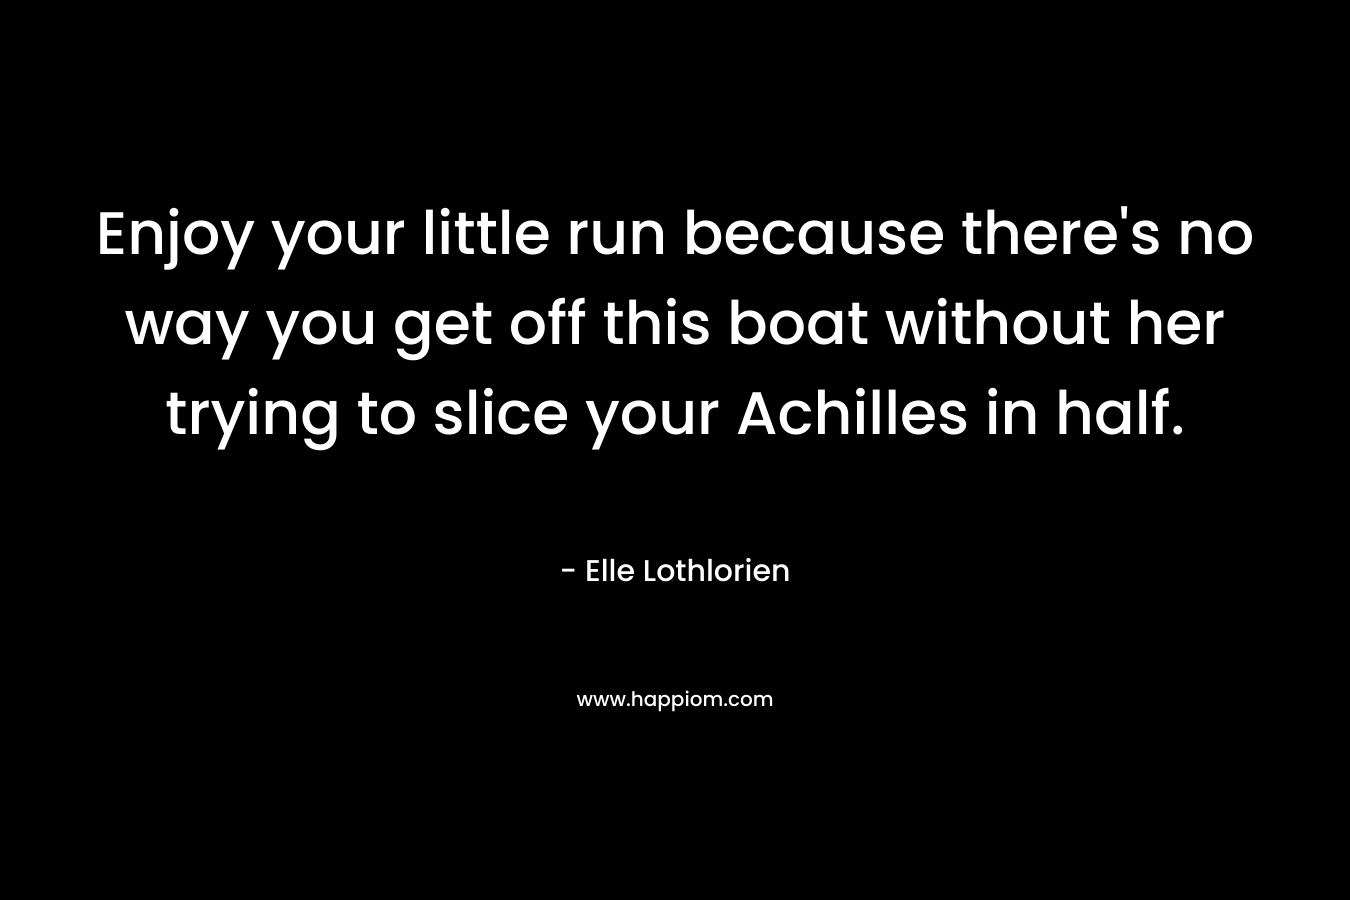 Enjoy your little run because there's no way you get off this boat without her trying to slice your Achilles in half.